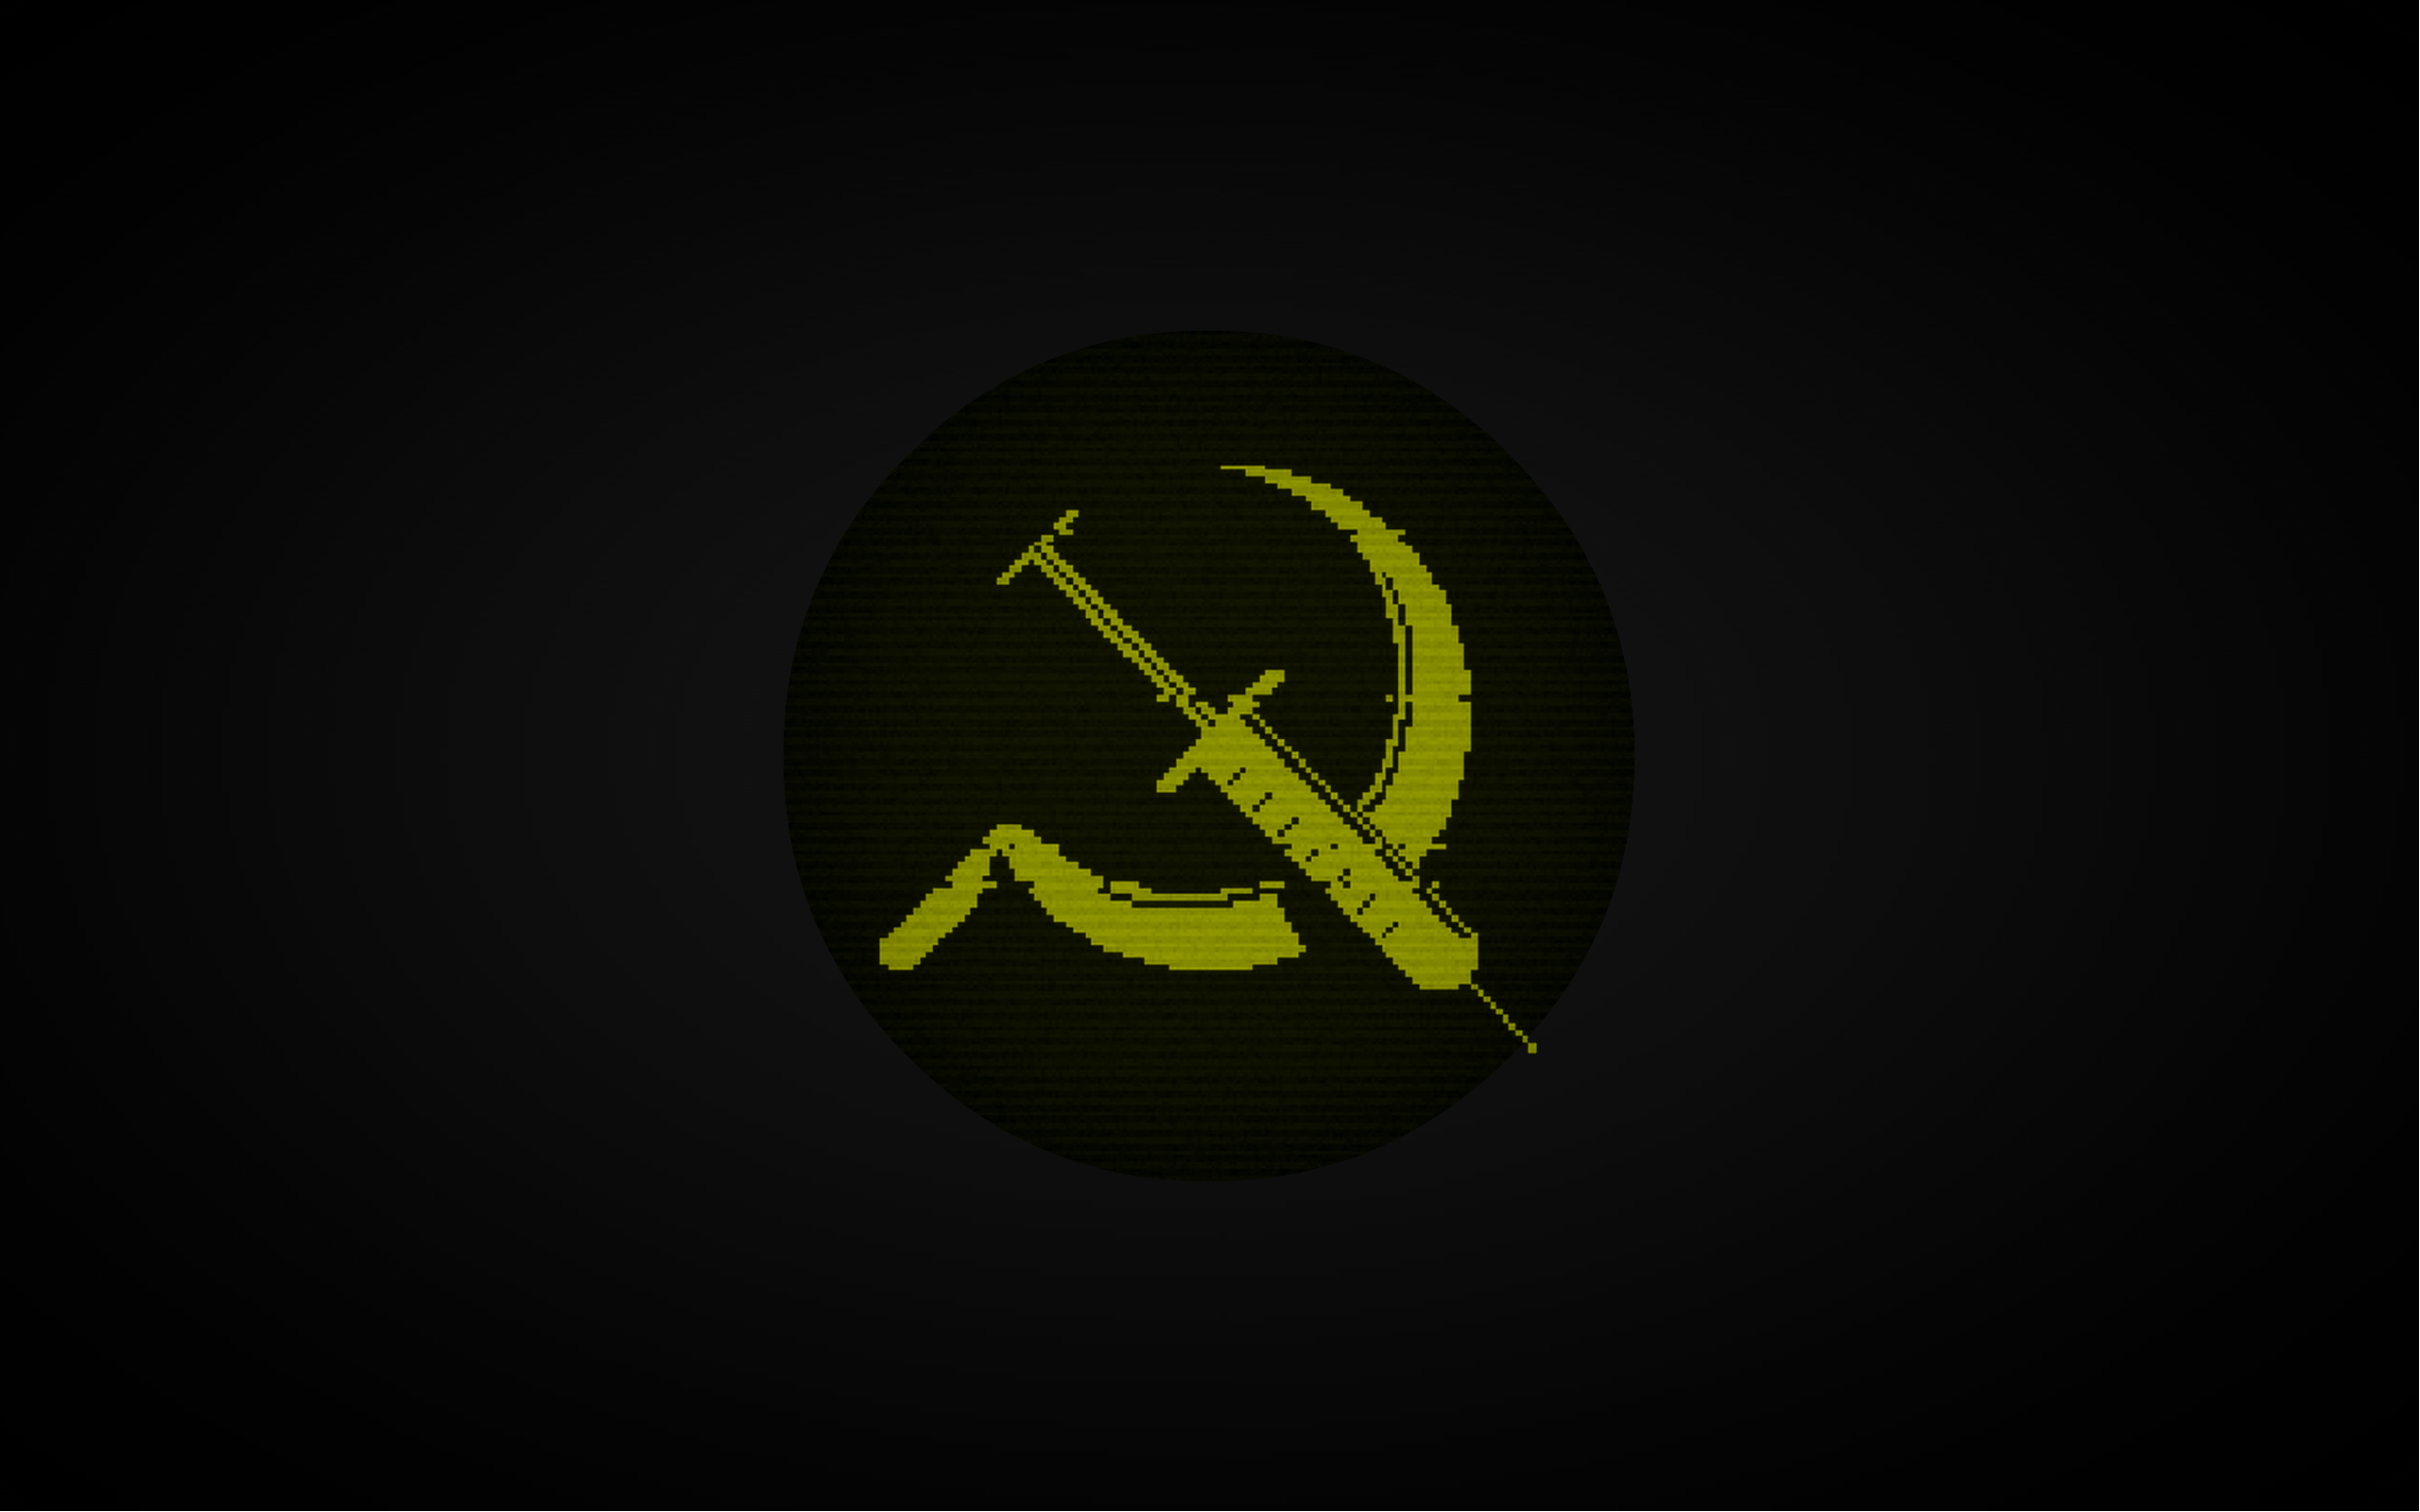 Black Background USSR Minimalism Video Games Pixels Simple Background Syringe Hammer And Sickle Yell 2560x1600